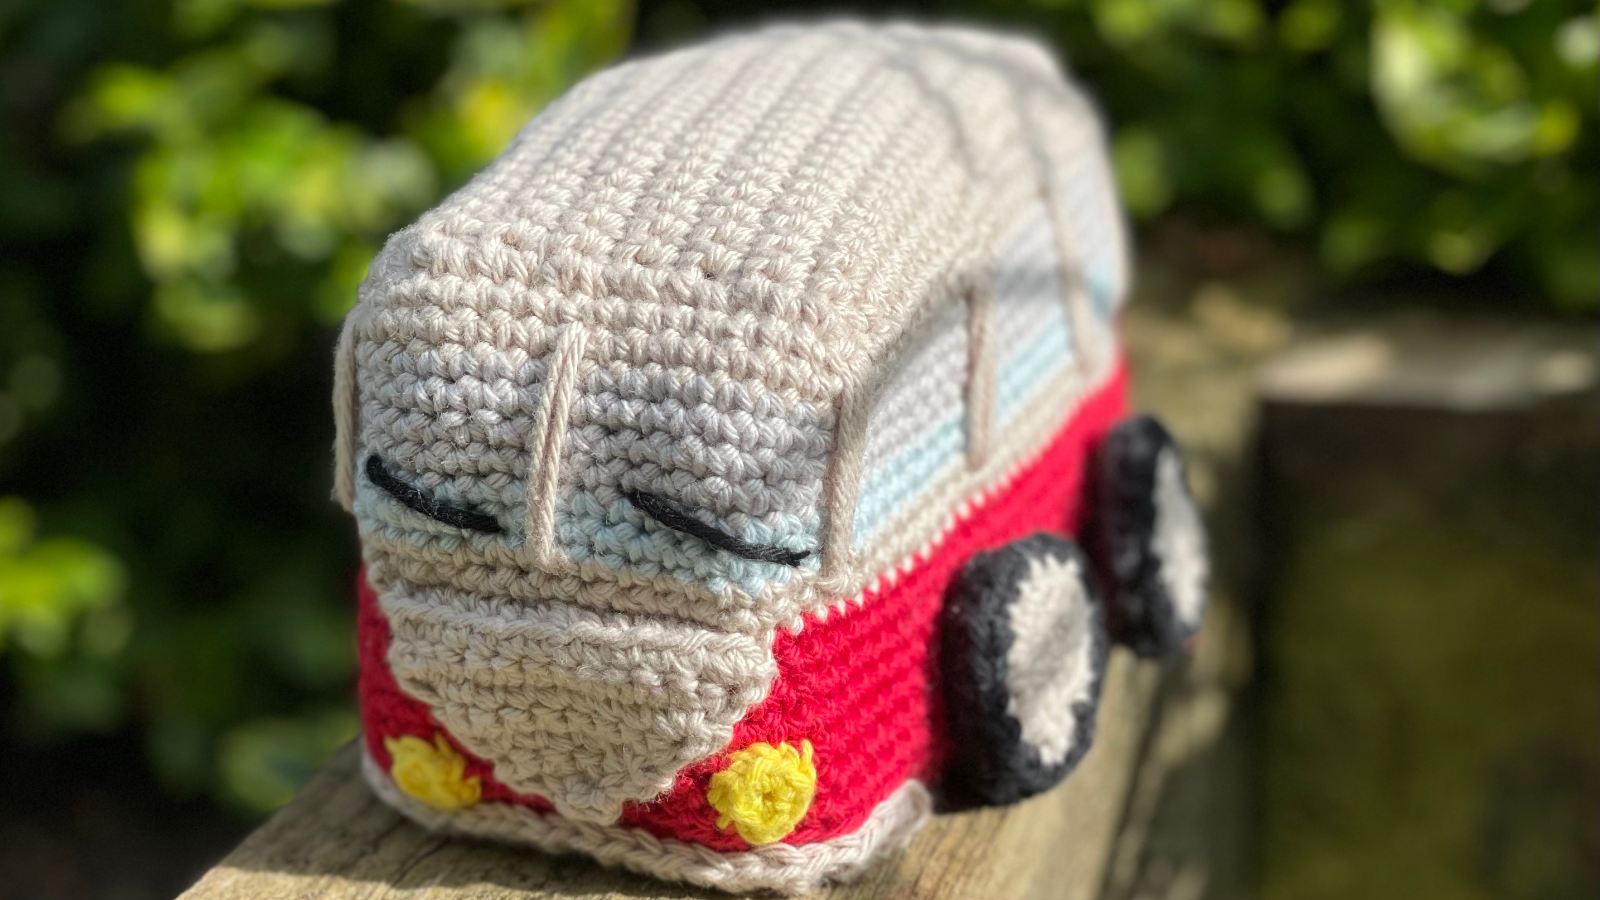 Amigurumi Toy Combi Van. Red body with cream coloured roof, black wheels and yellow lights on the front.